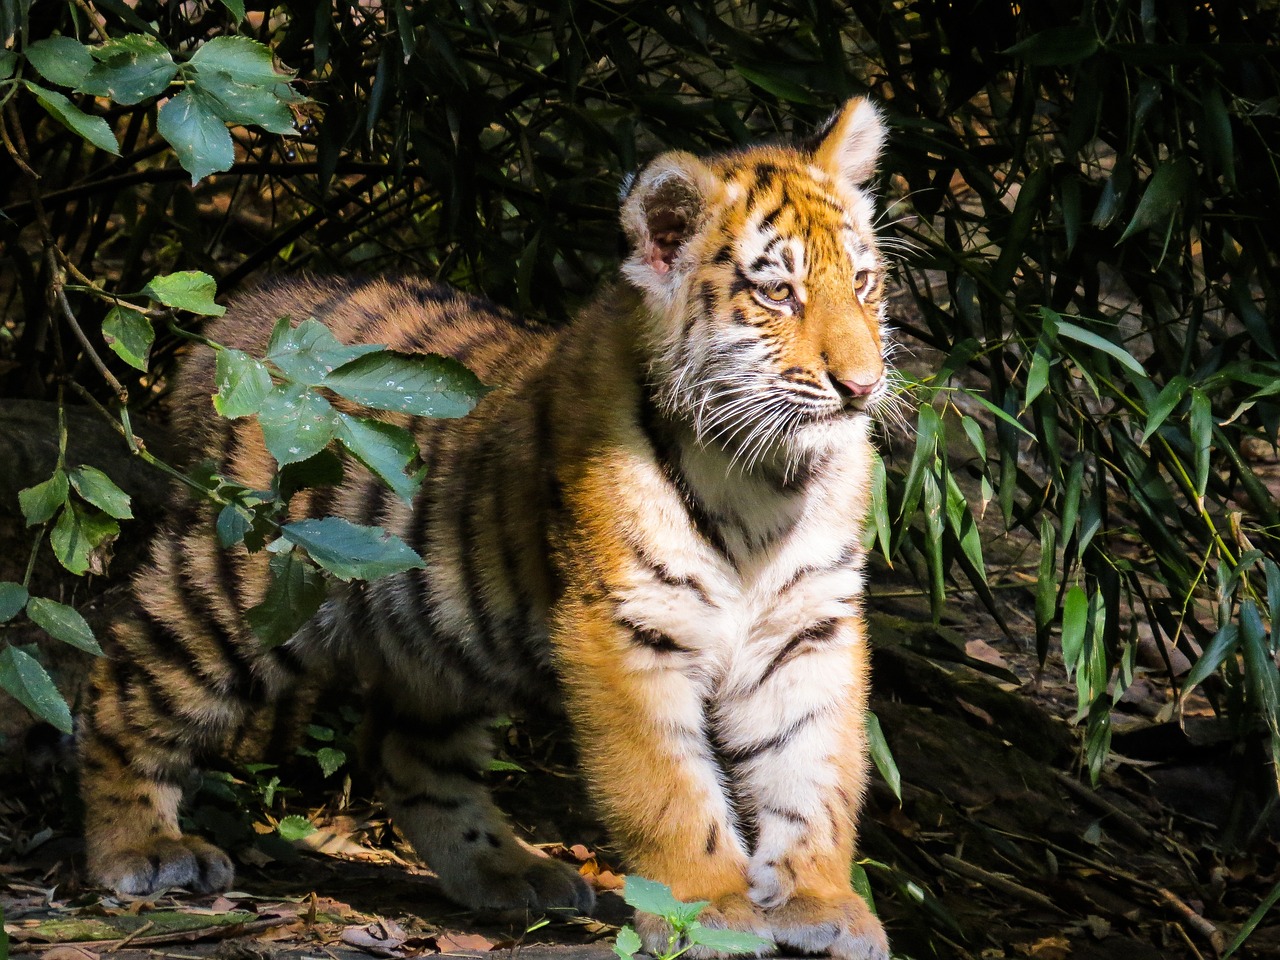 a tiger that is standing in the dirt, a portrait, shutterstock, sumatraism, cub, enjoying a stroll in the forest, in a sunbeam, museum quality photo